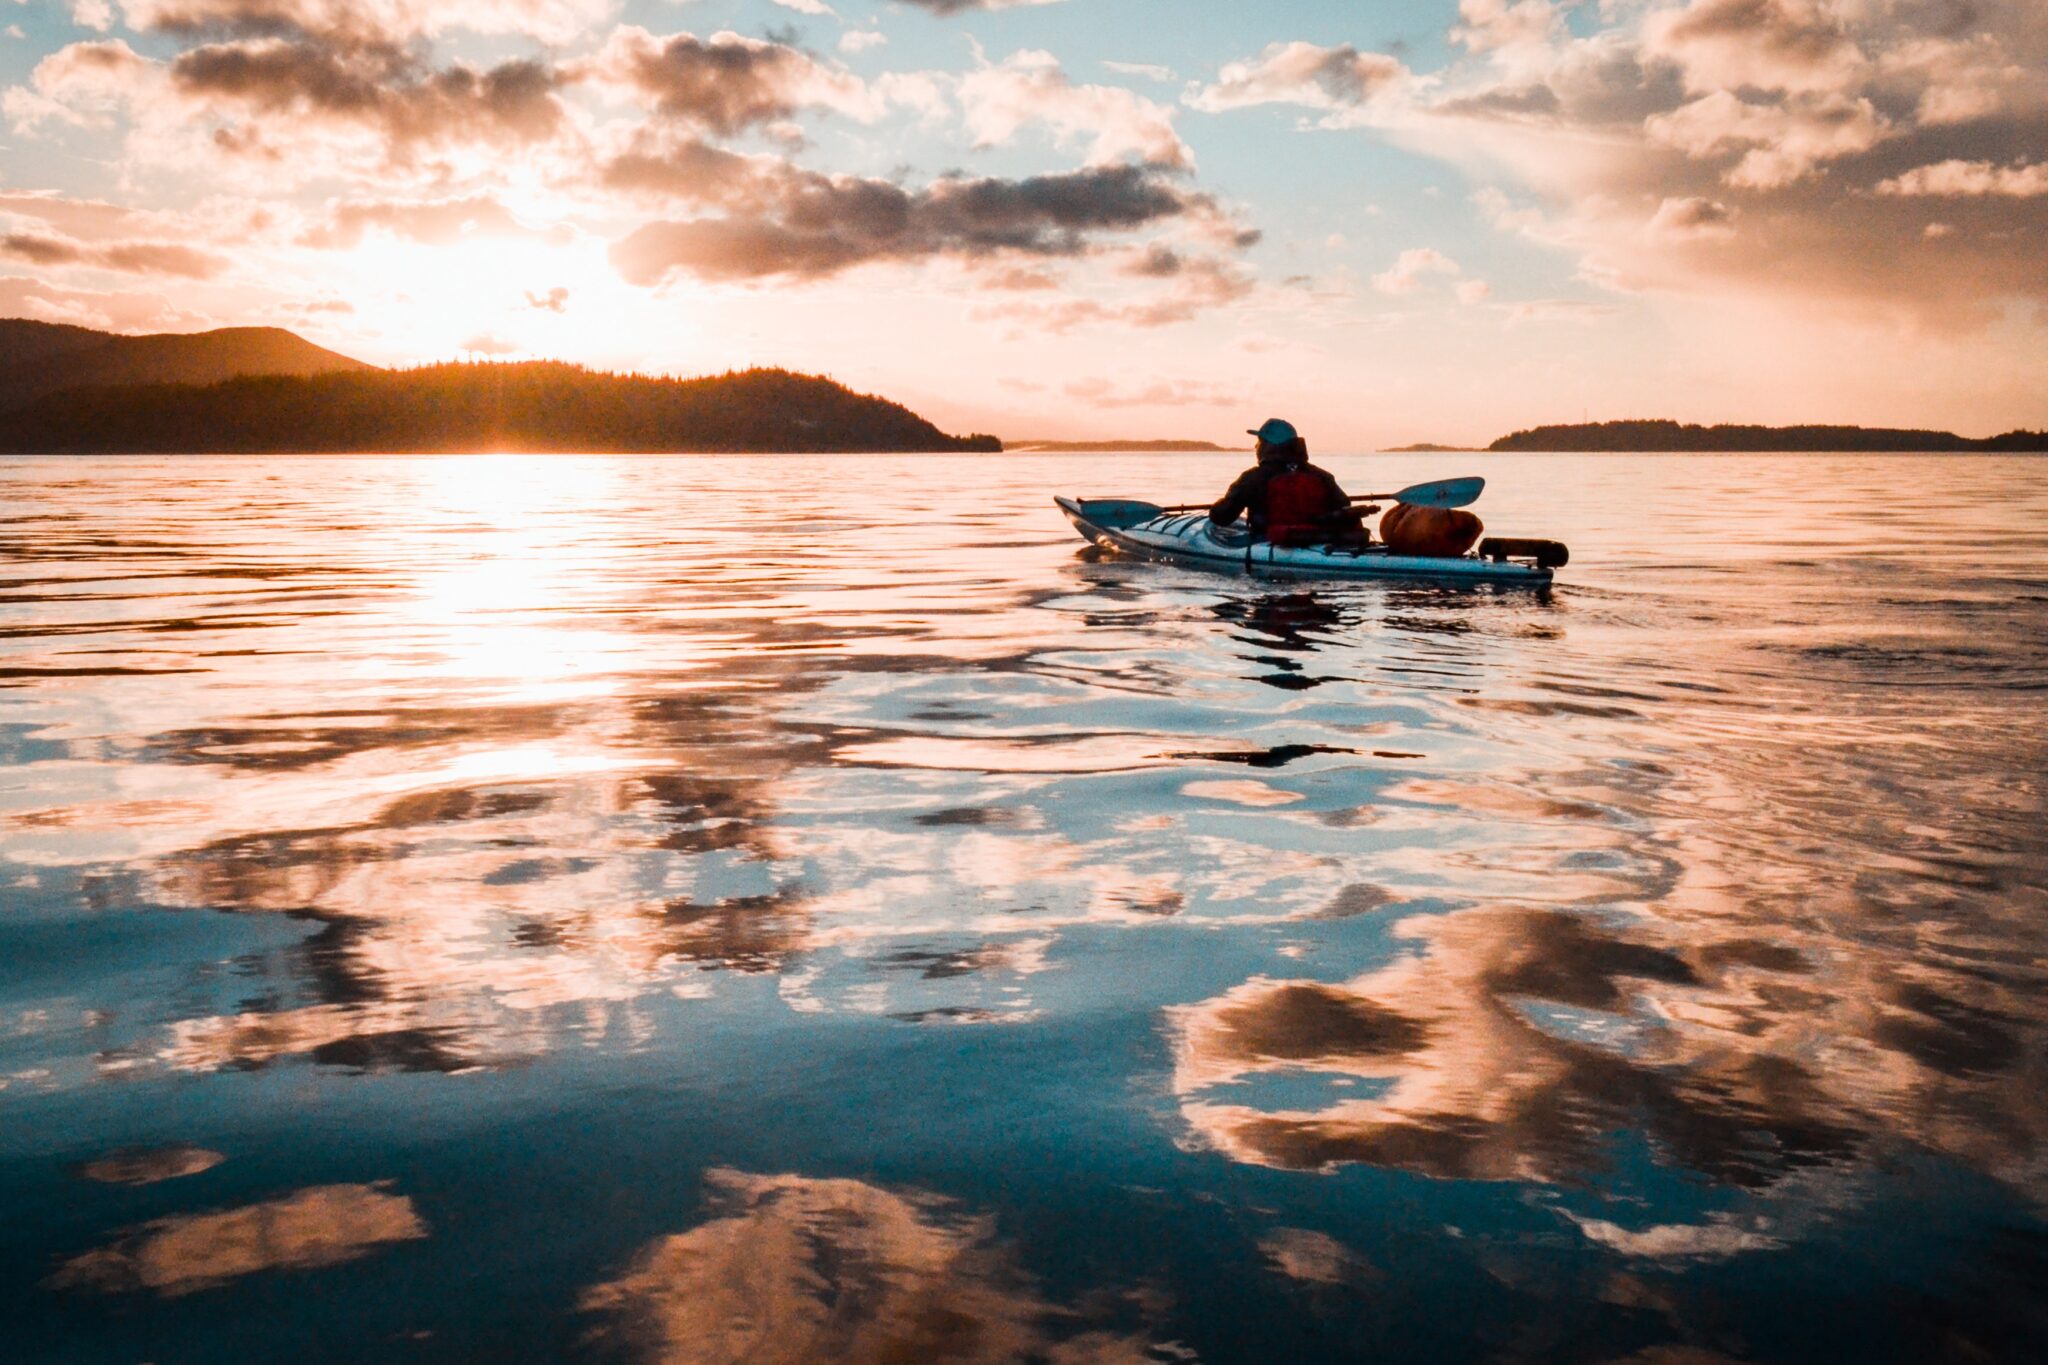 A man kayaks into the sunset on glassy water